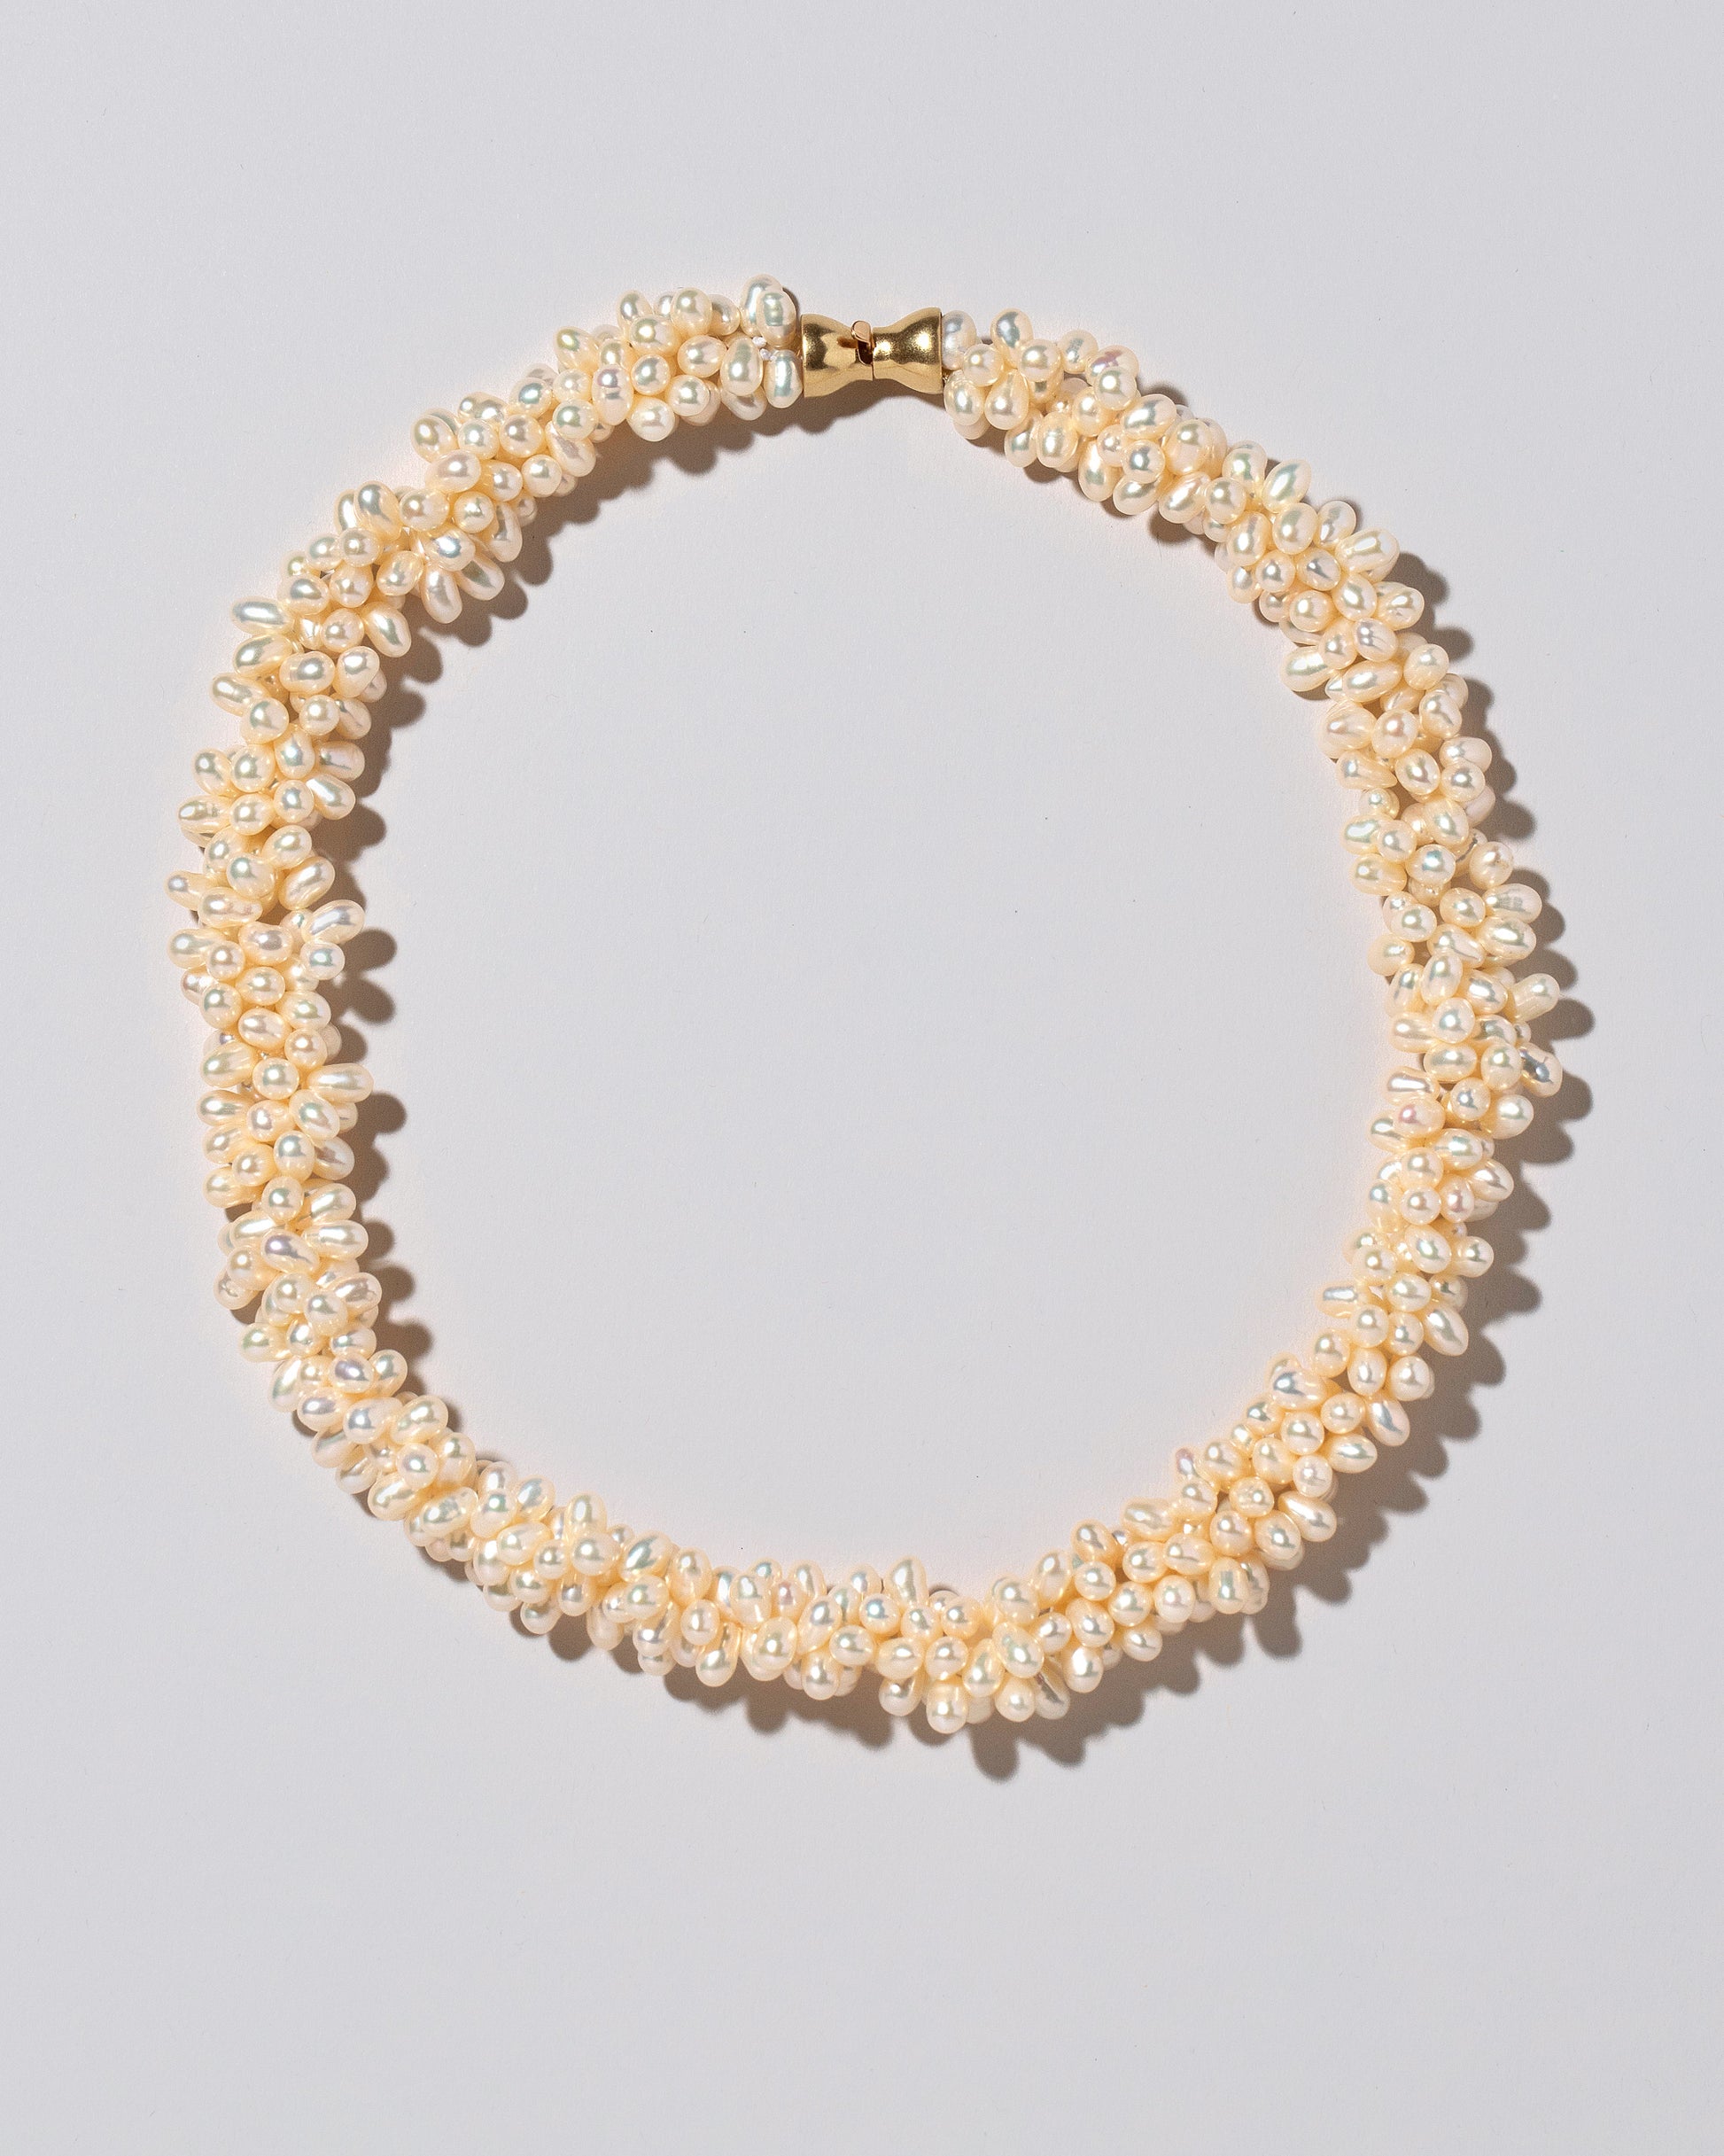 Push Clasp Braided Zipper Pearl Collar Necklace on light color background.